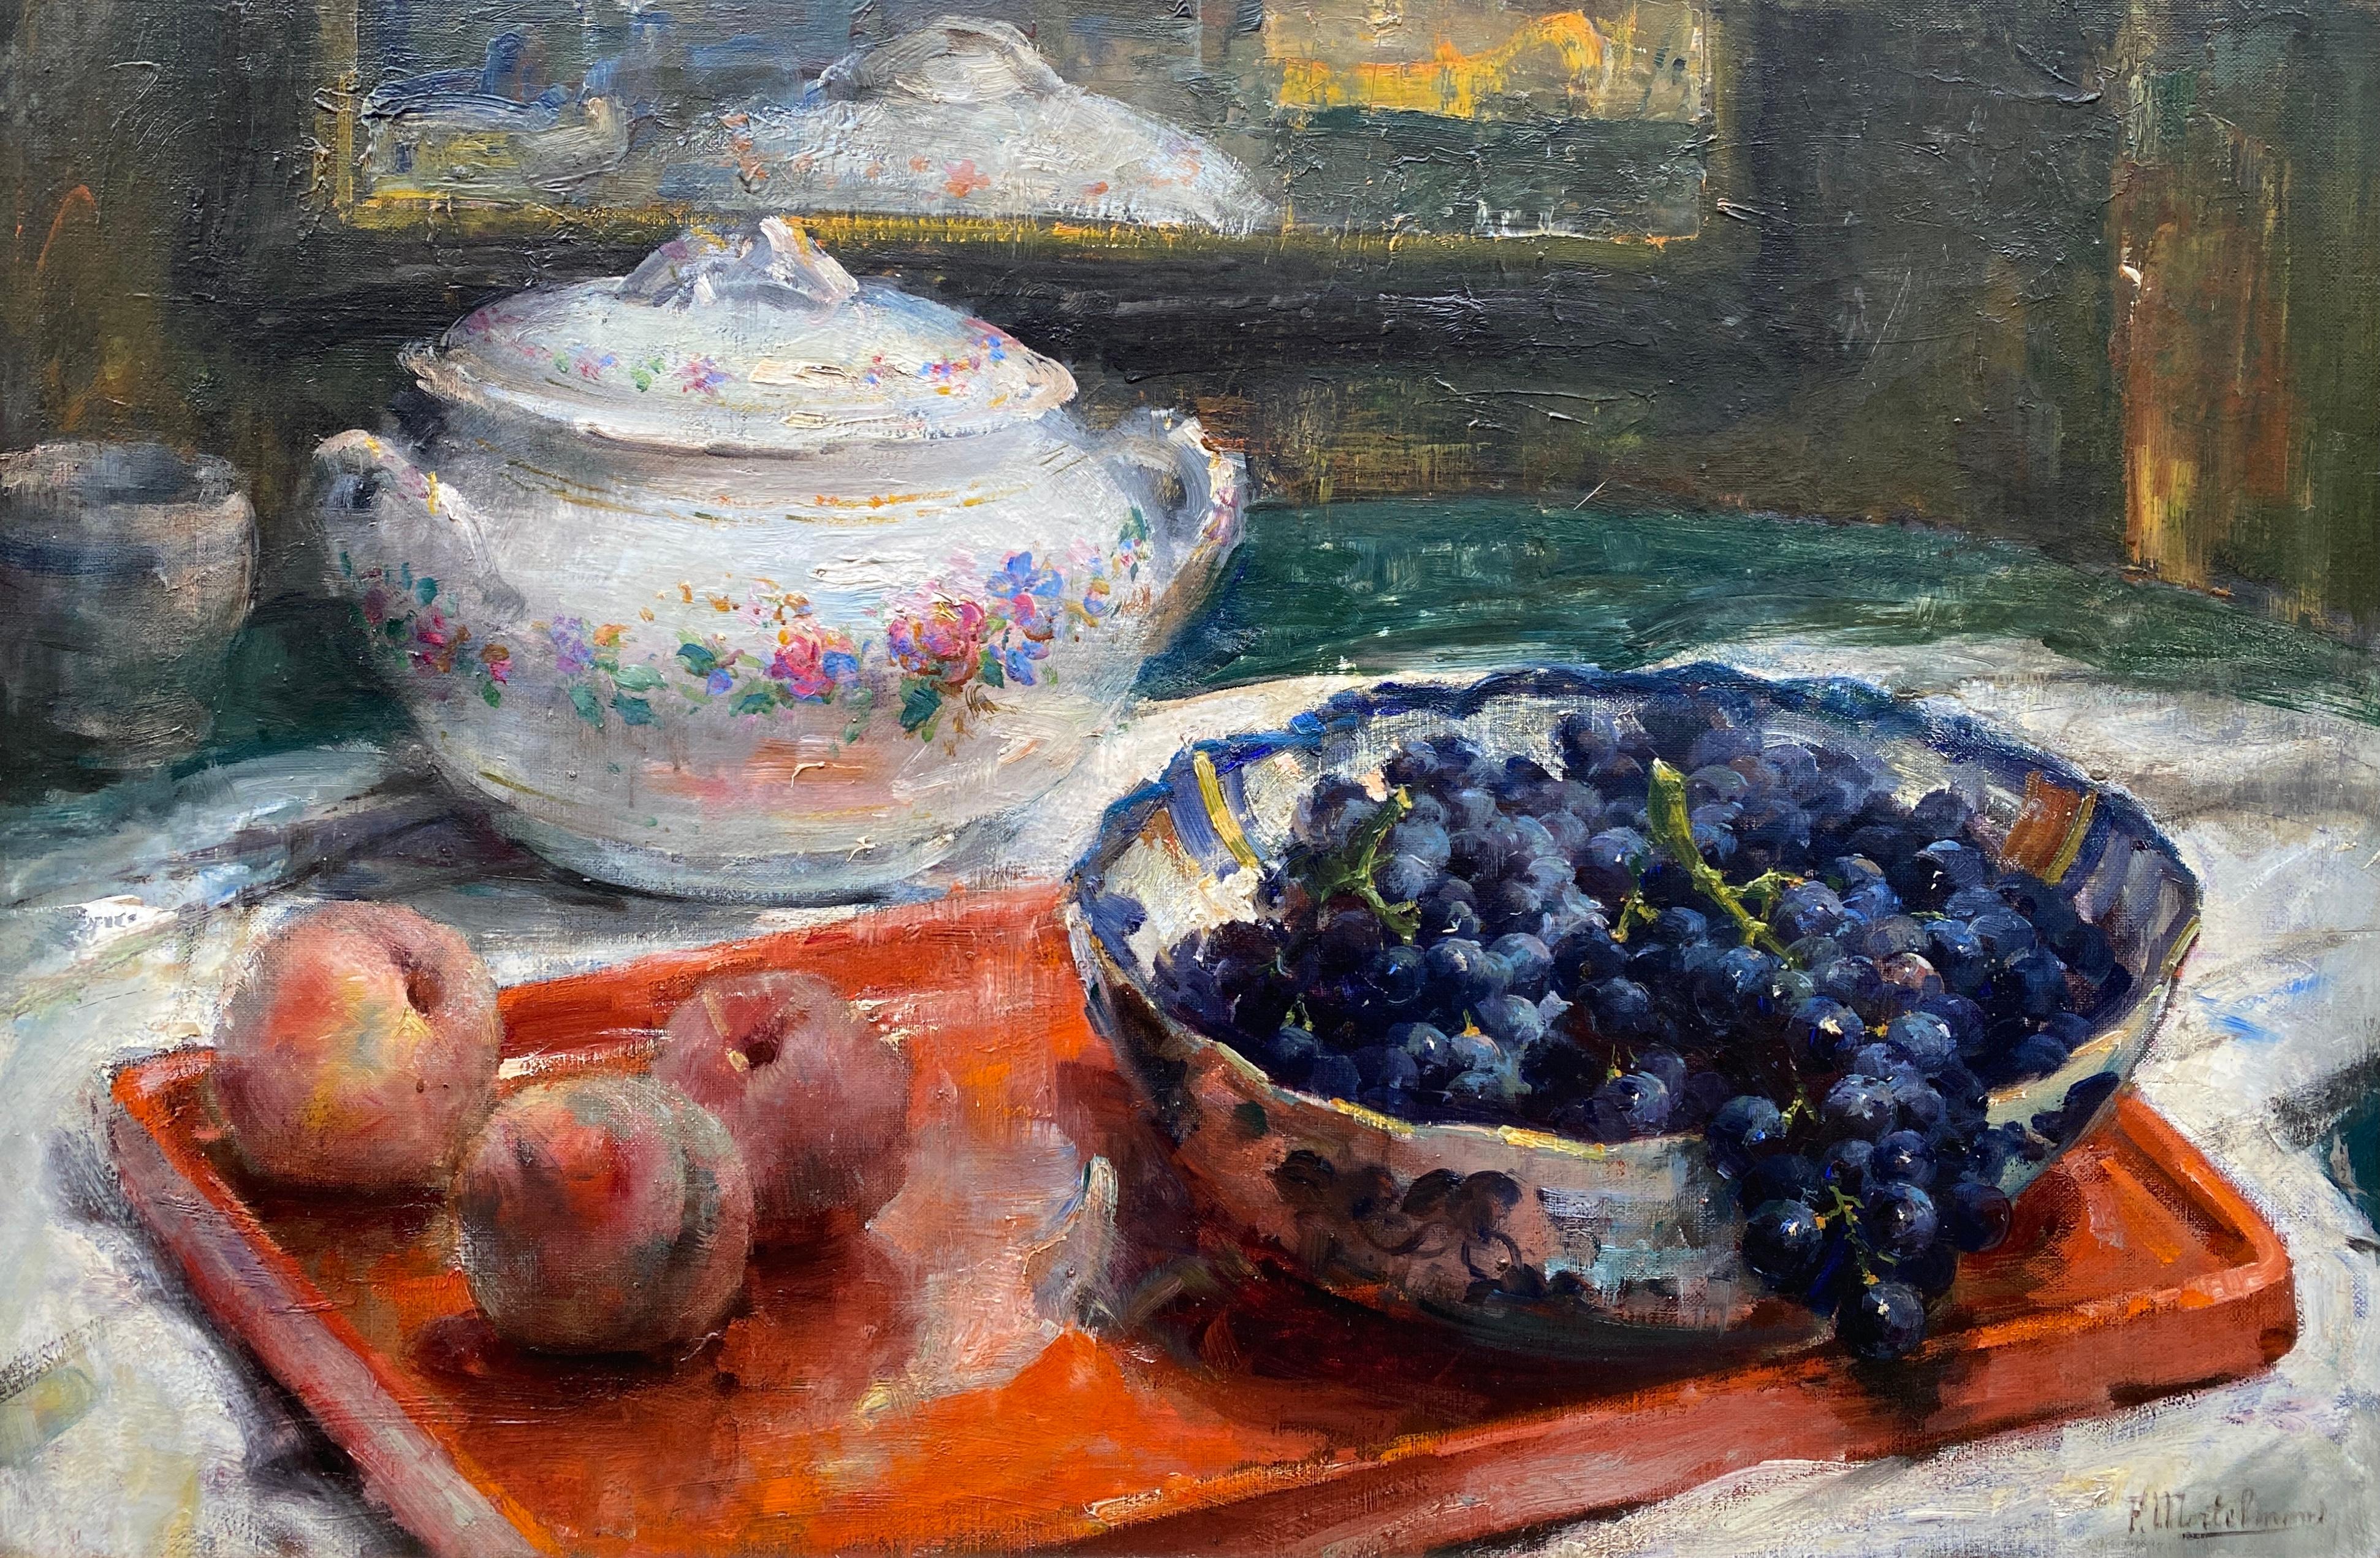 A Still Life with Porcelain and Fruit, Mortelmans Frans, Antwerp 1865 – 1936 - Painting by Frans Mortelmans